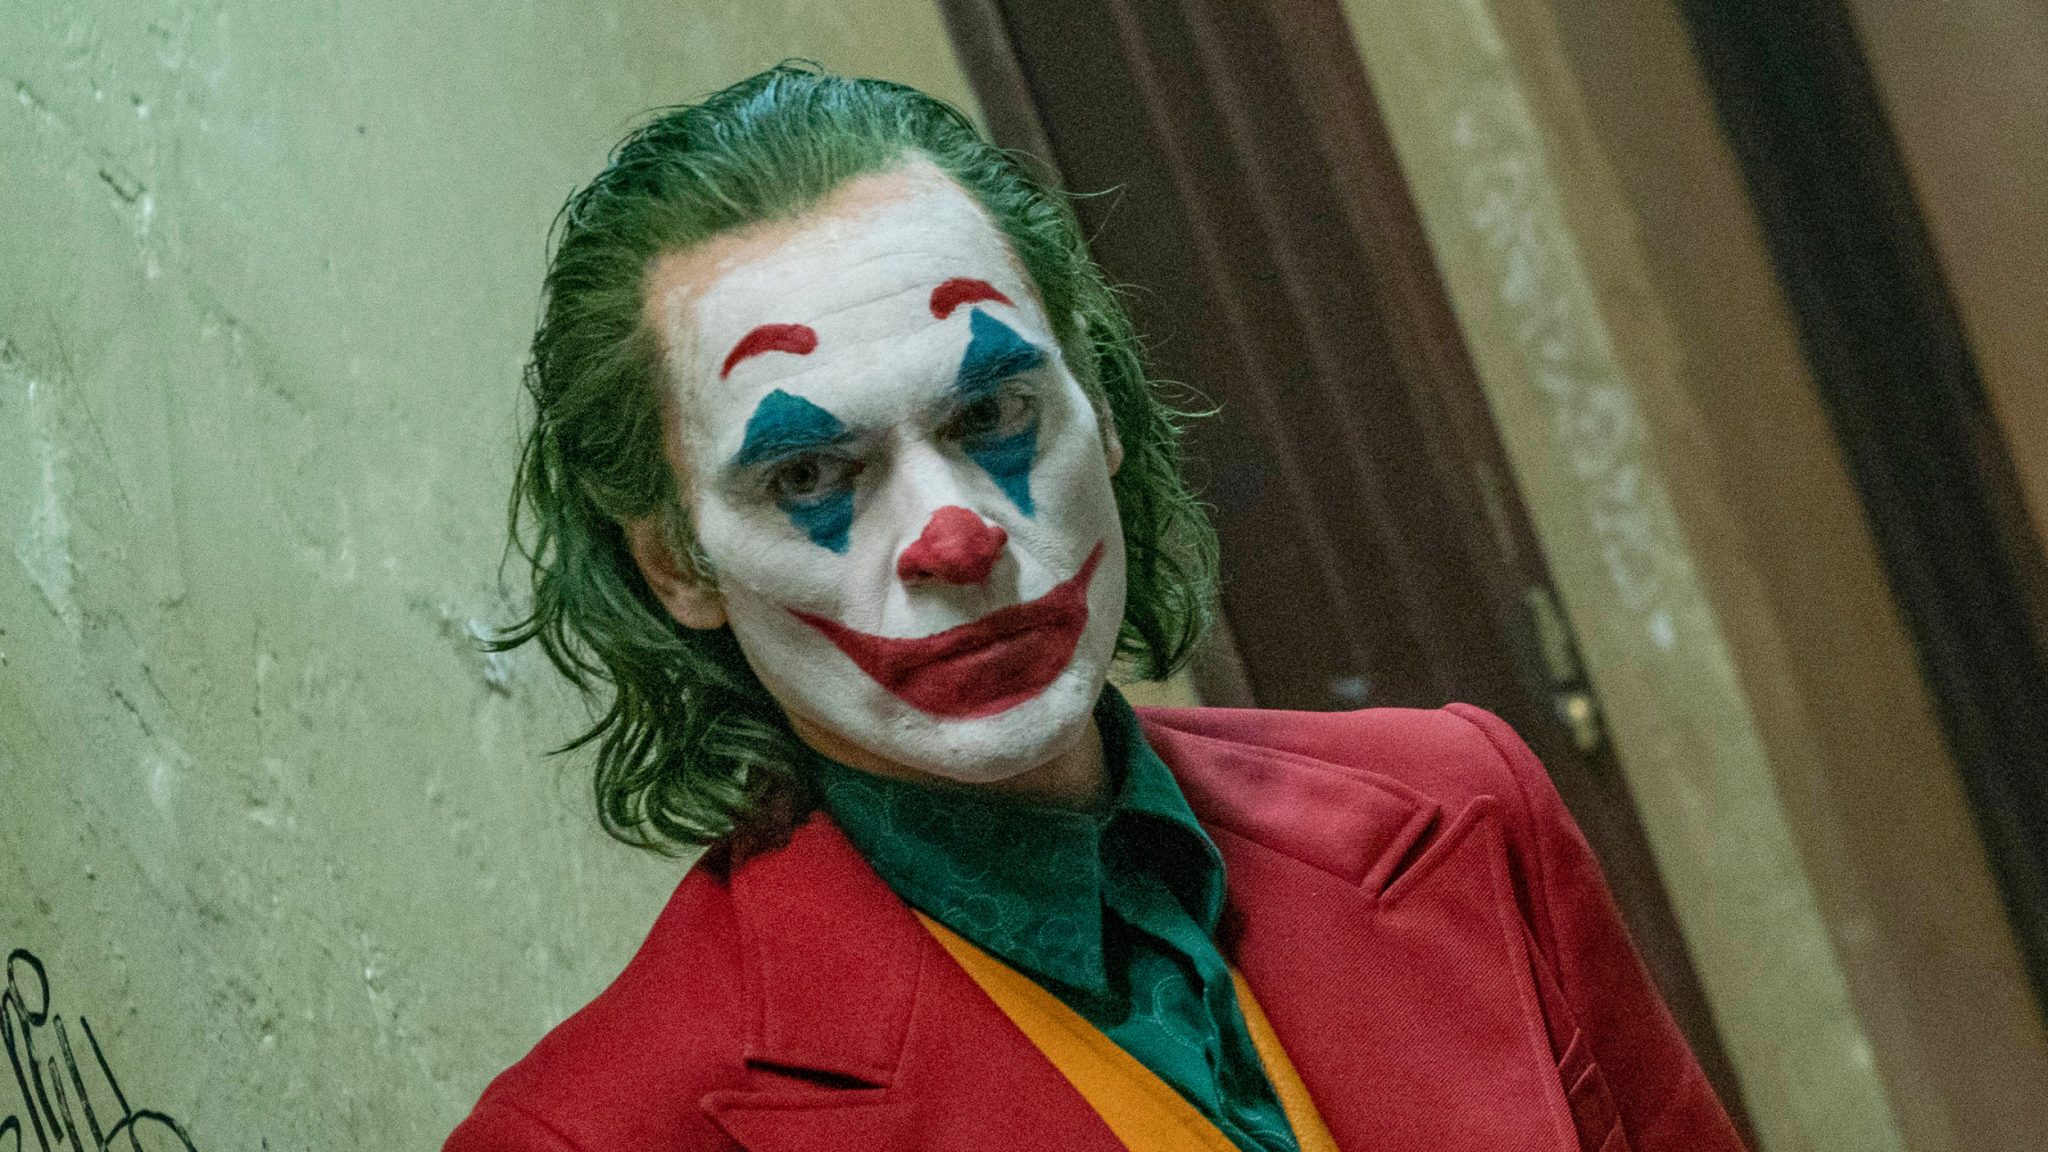 Over 70% of HBO Now users have switched to HBO Max with Joker top ...